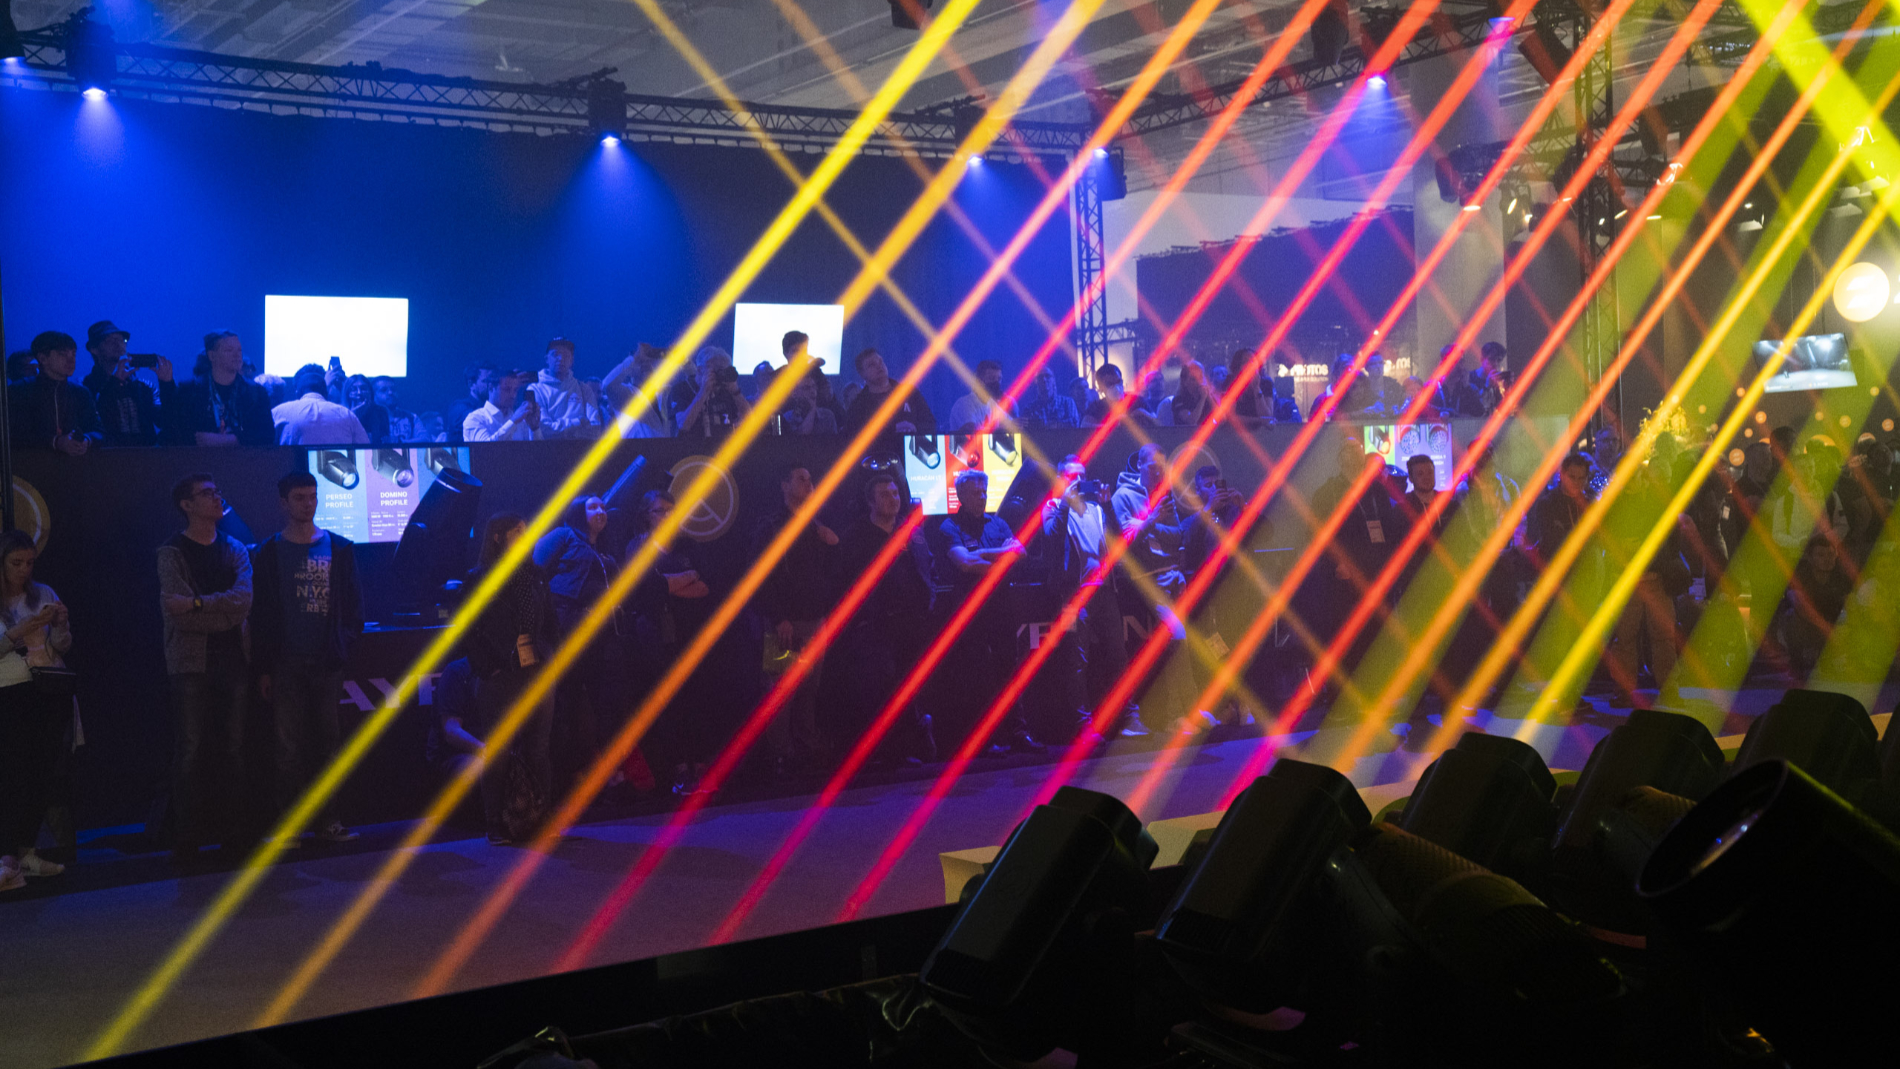 Light and laser show at Prolight + Sound